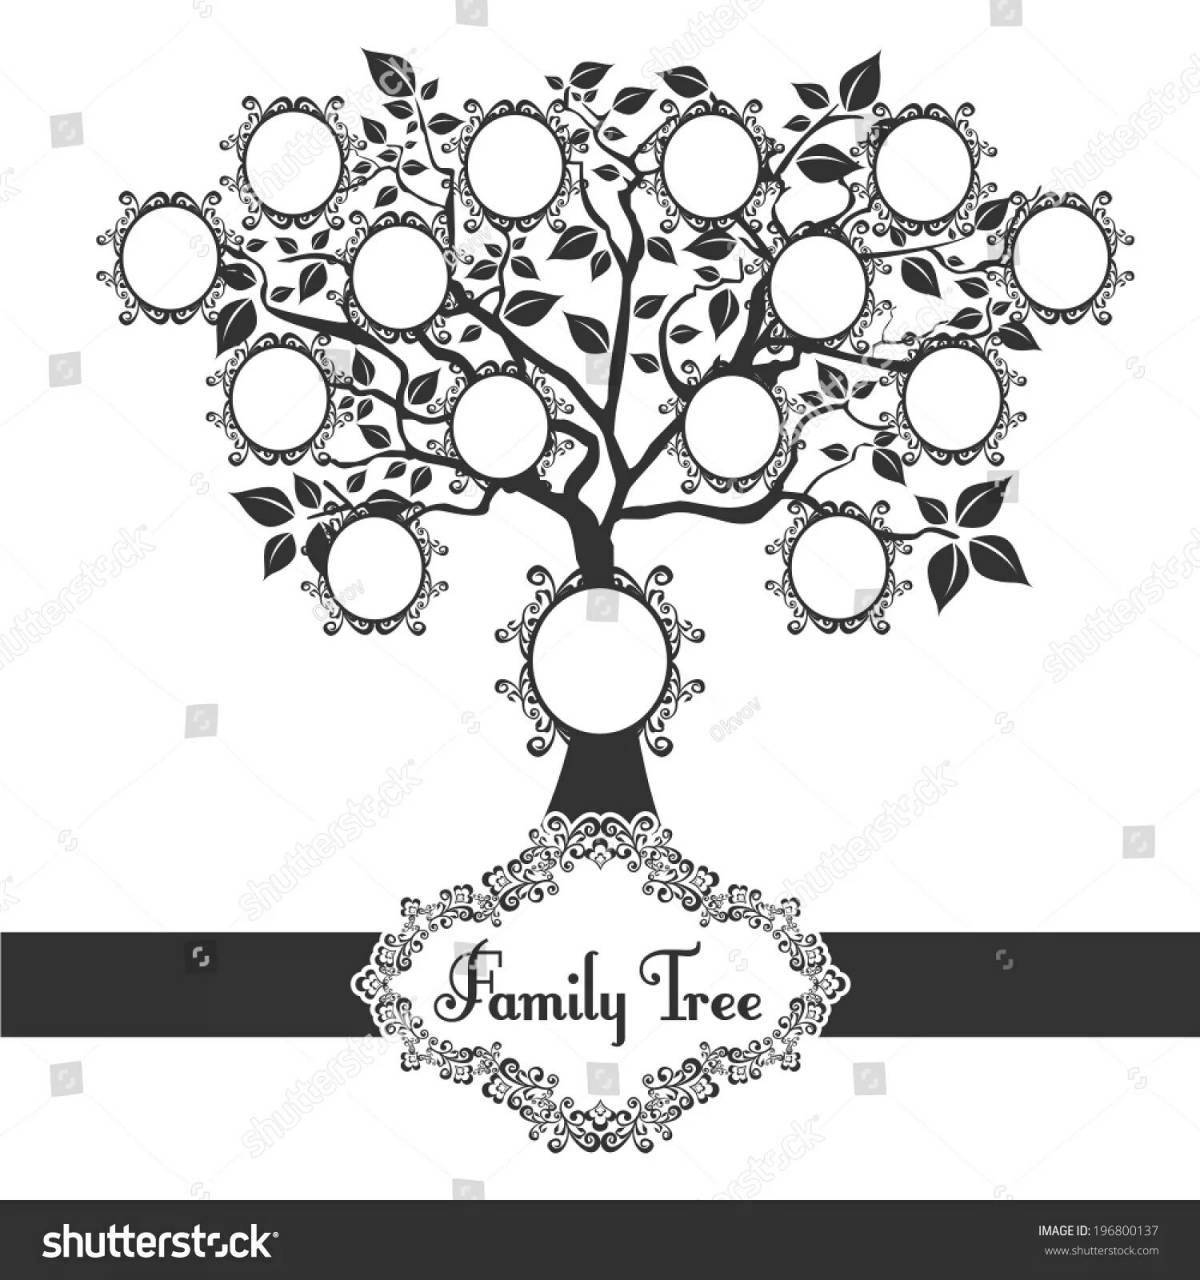 Stylish family tree template to fill out